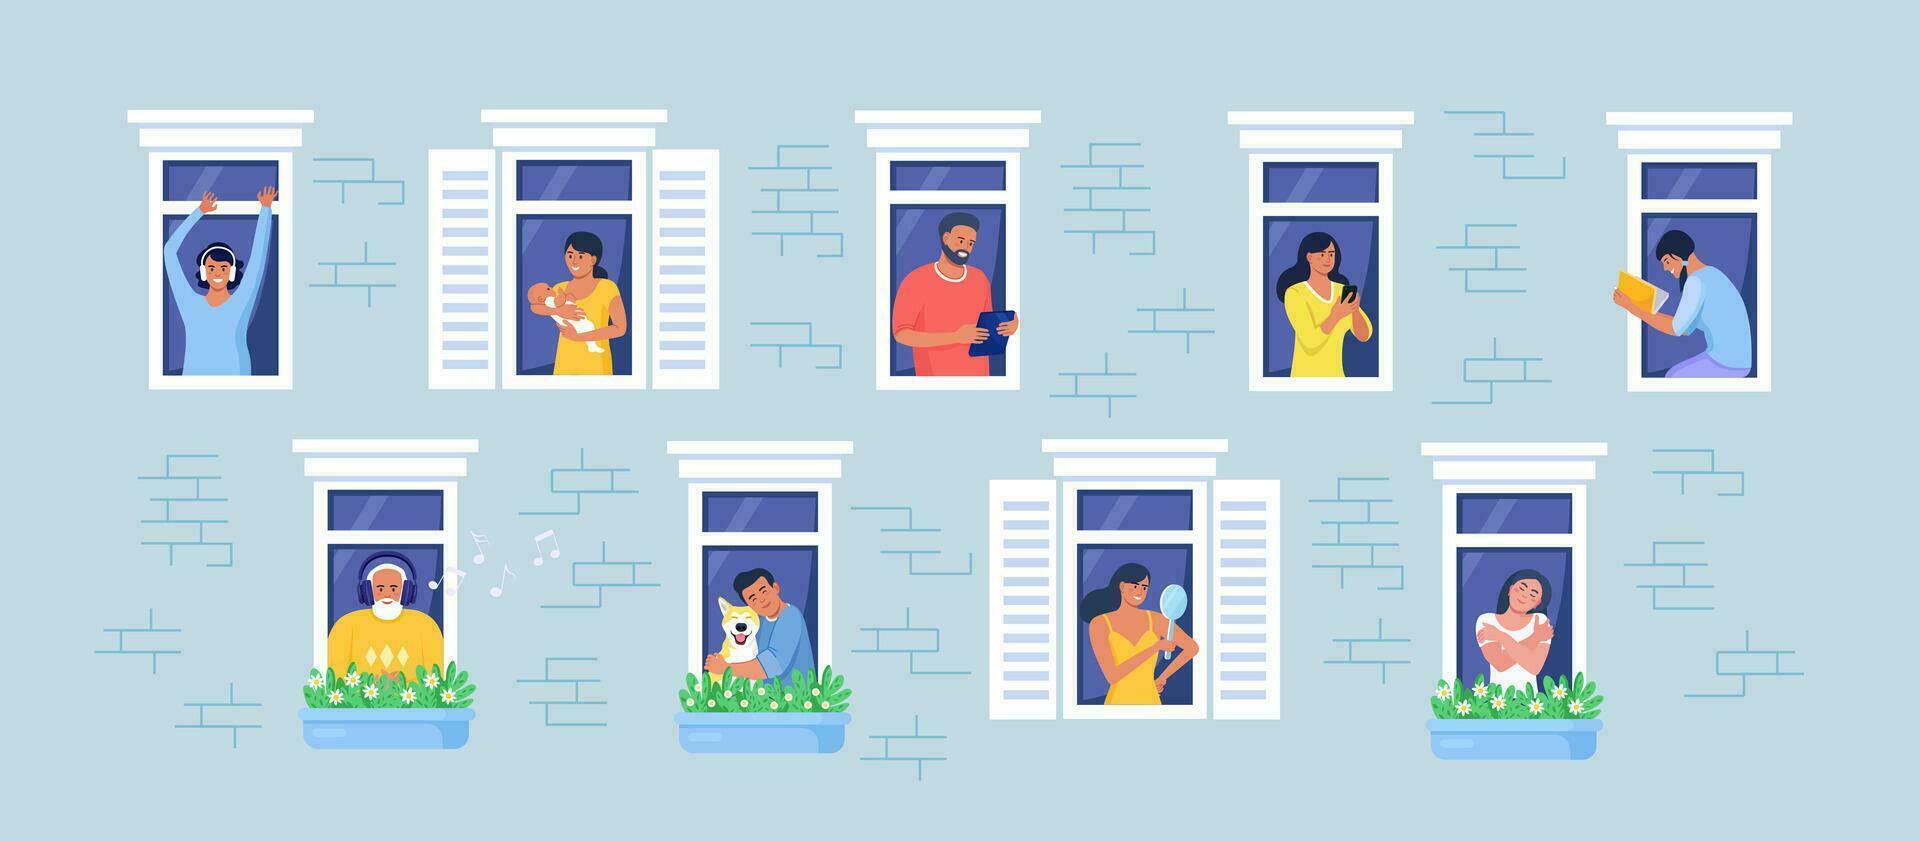 Outer wall of house with neighbors and dog at windows. Happy men and women look out of apartments reading, take photo, chatting with phone, hugging, listening music. Stay home, daily routine activity vector